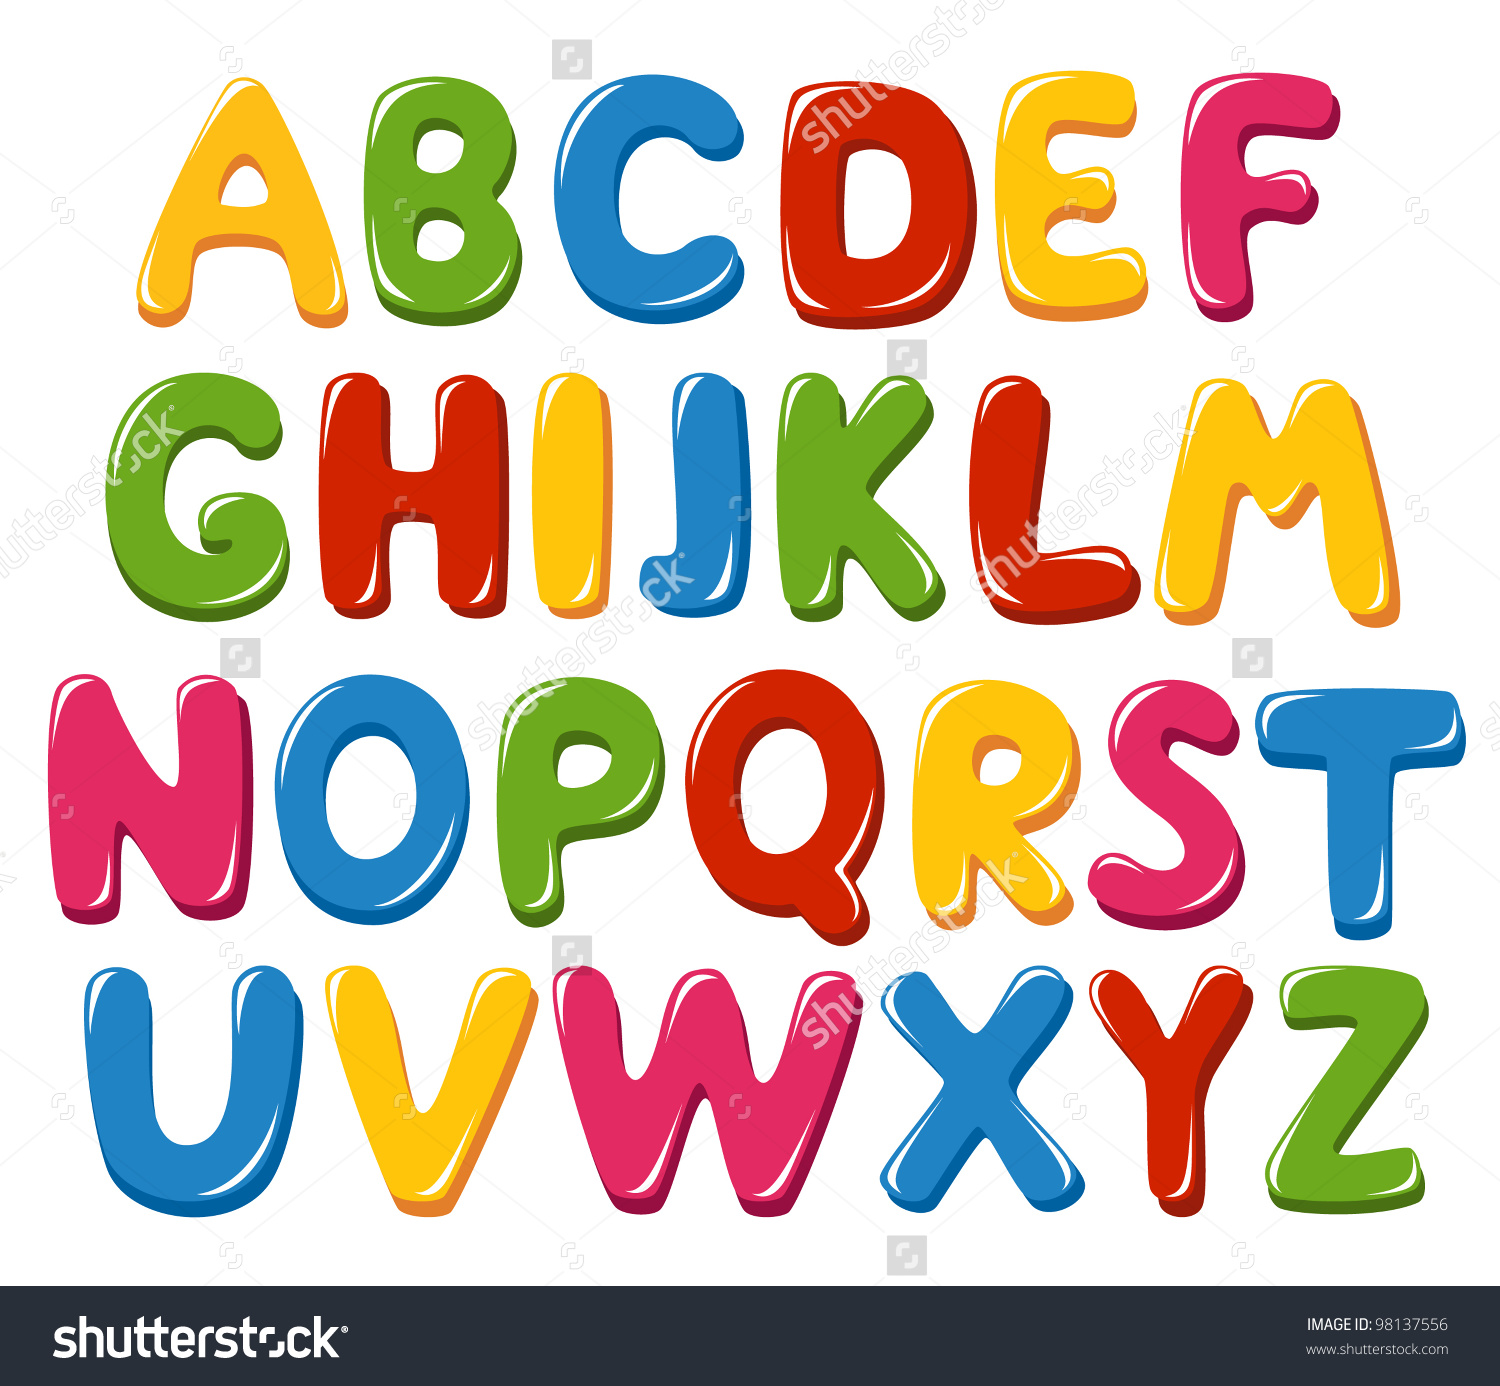 What is an alphabet?